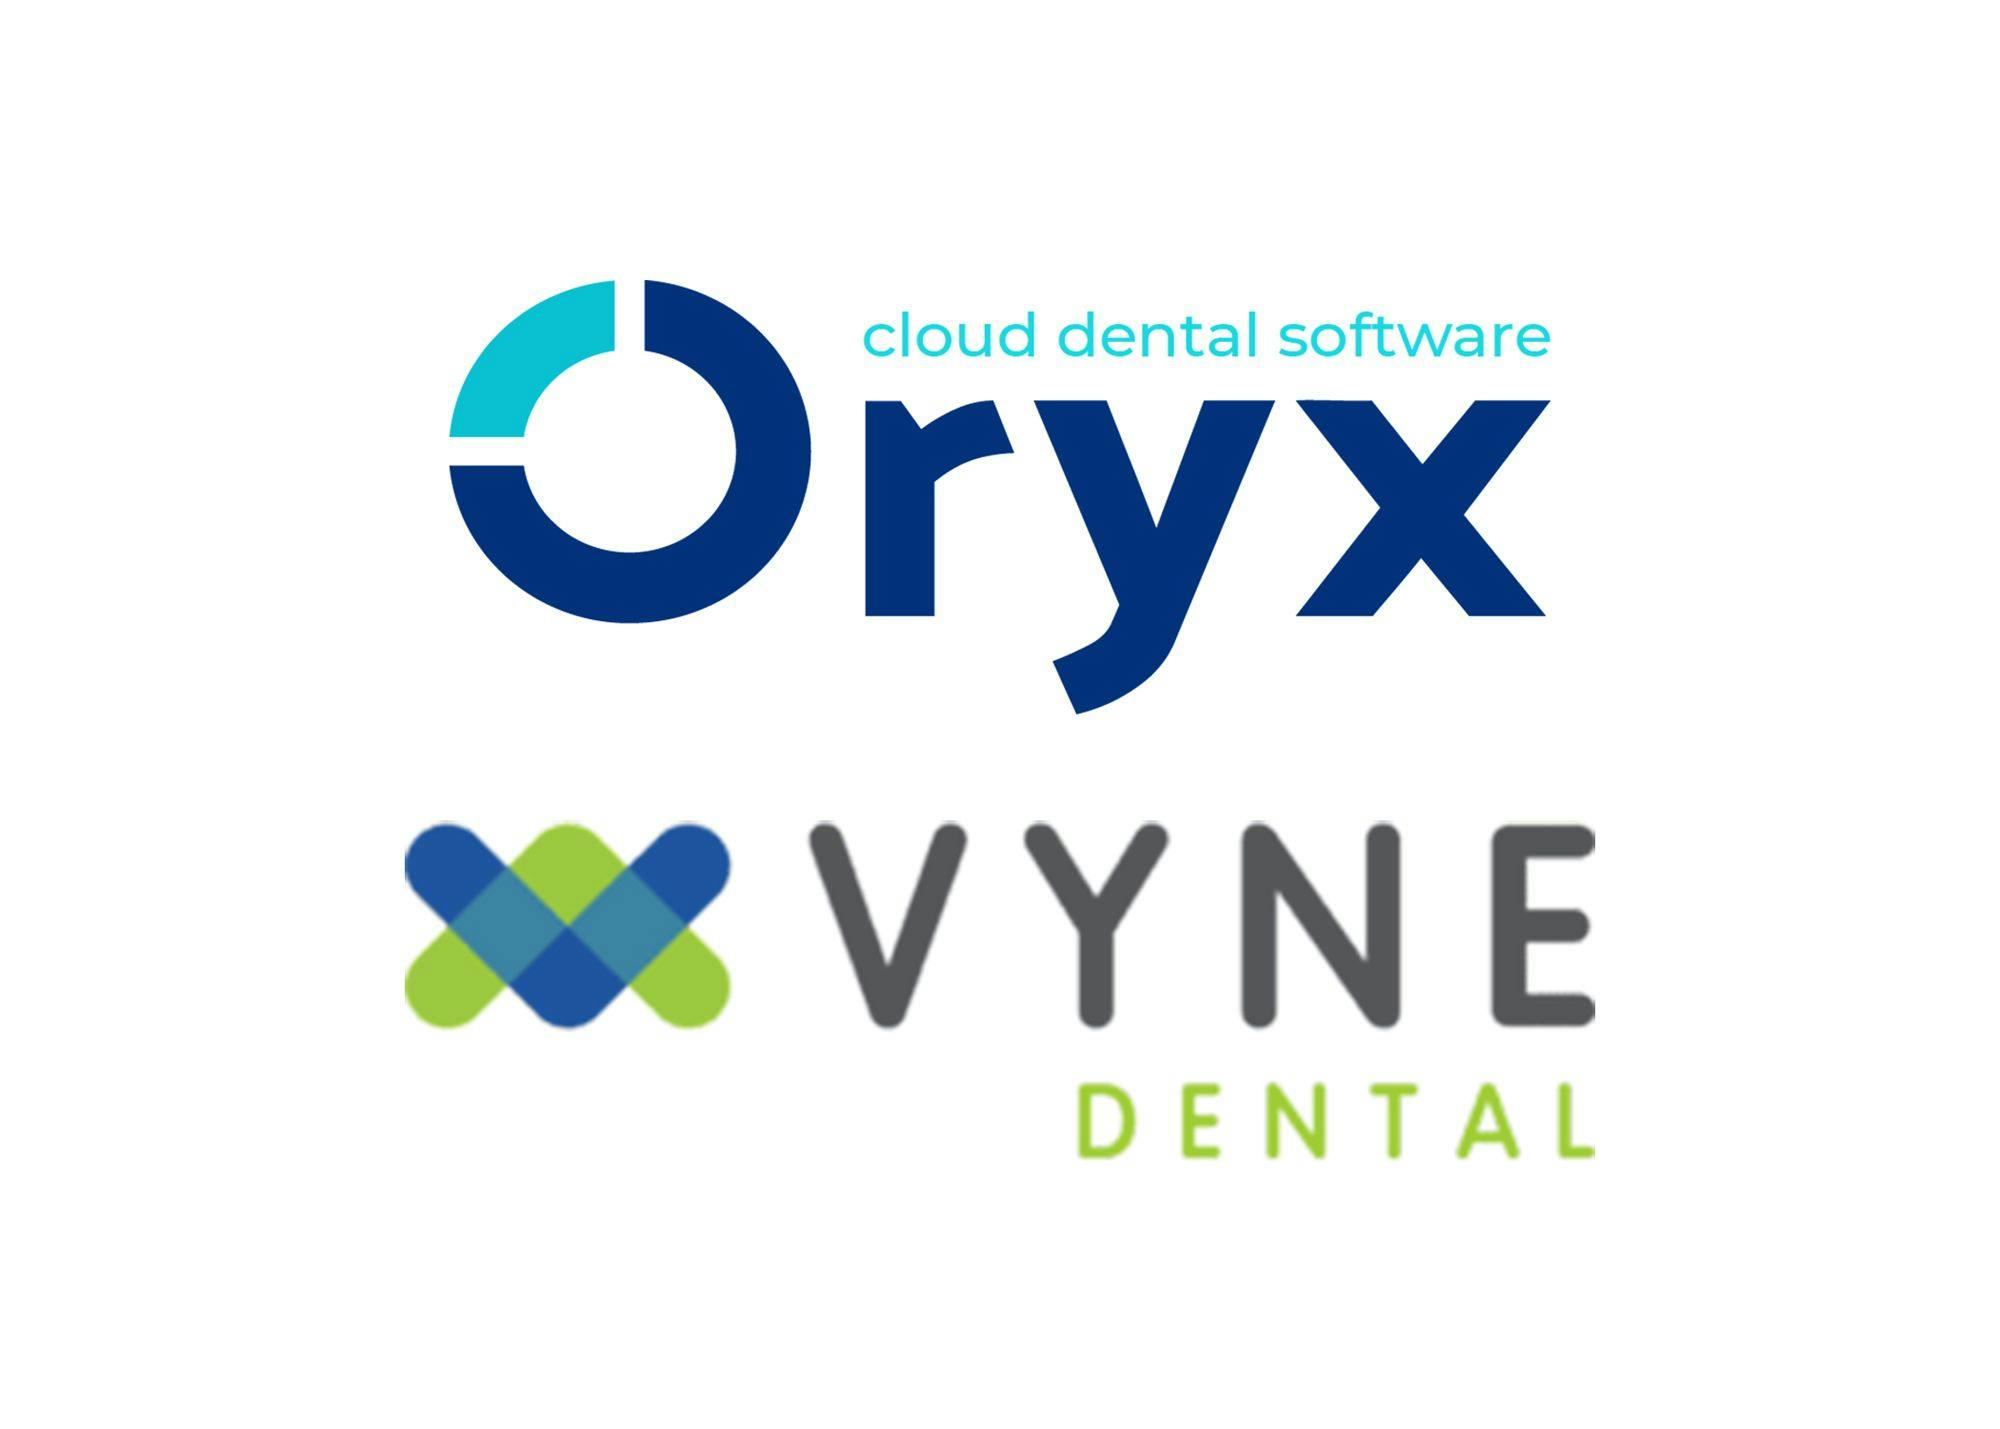 Oryx Dental Partners with Vyne Dental for Cloud Communications